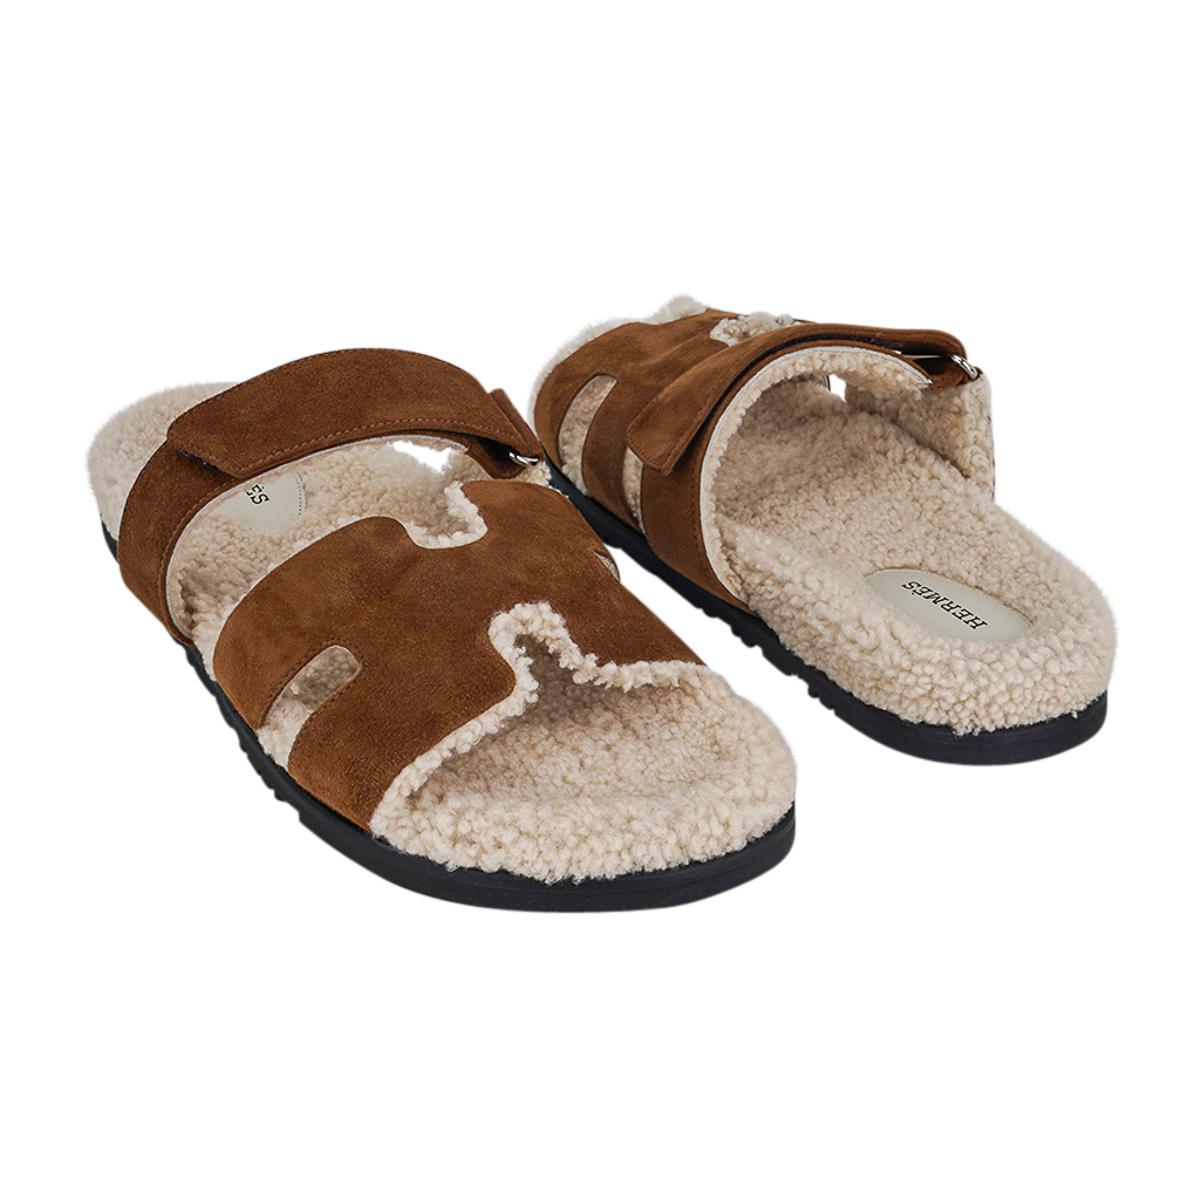 Hermes Chypre Brun Fume Woolskin / Shearling Men's Sandal 43 In New Condition For Sale In Miami, FL